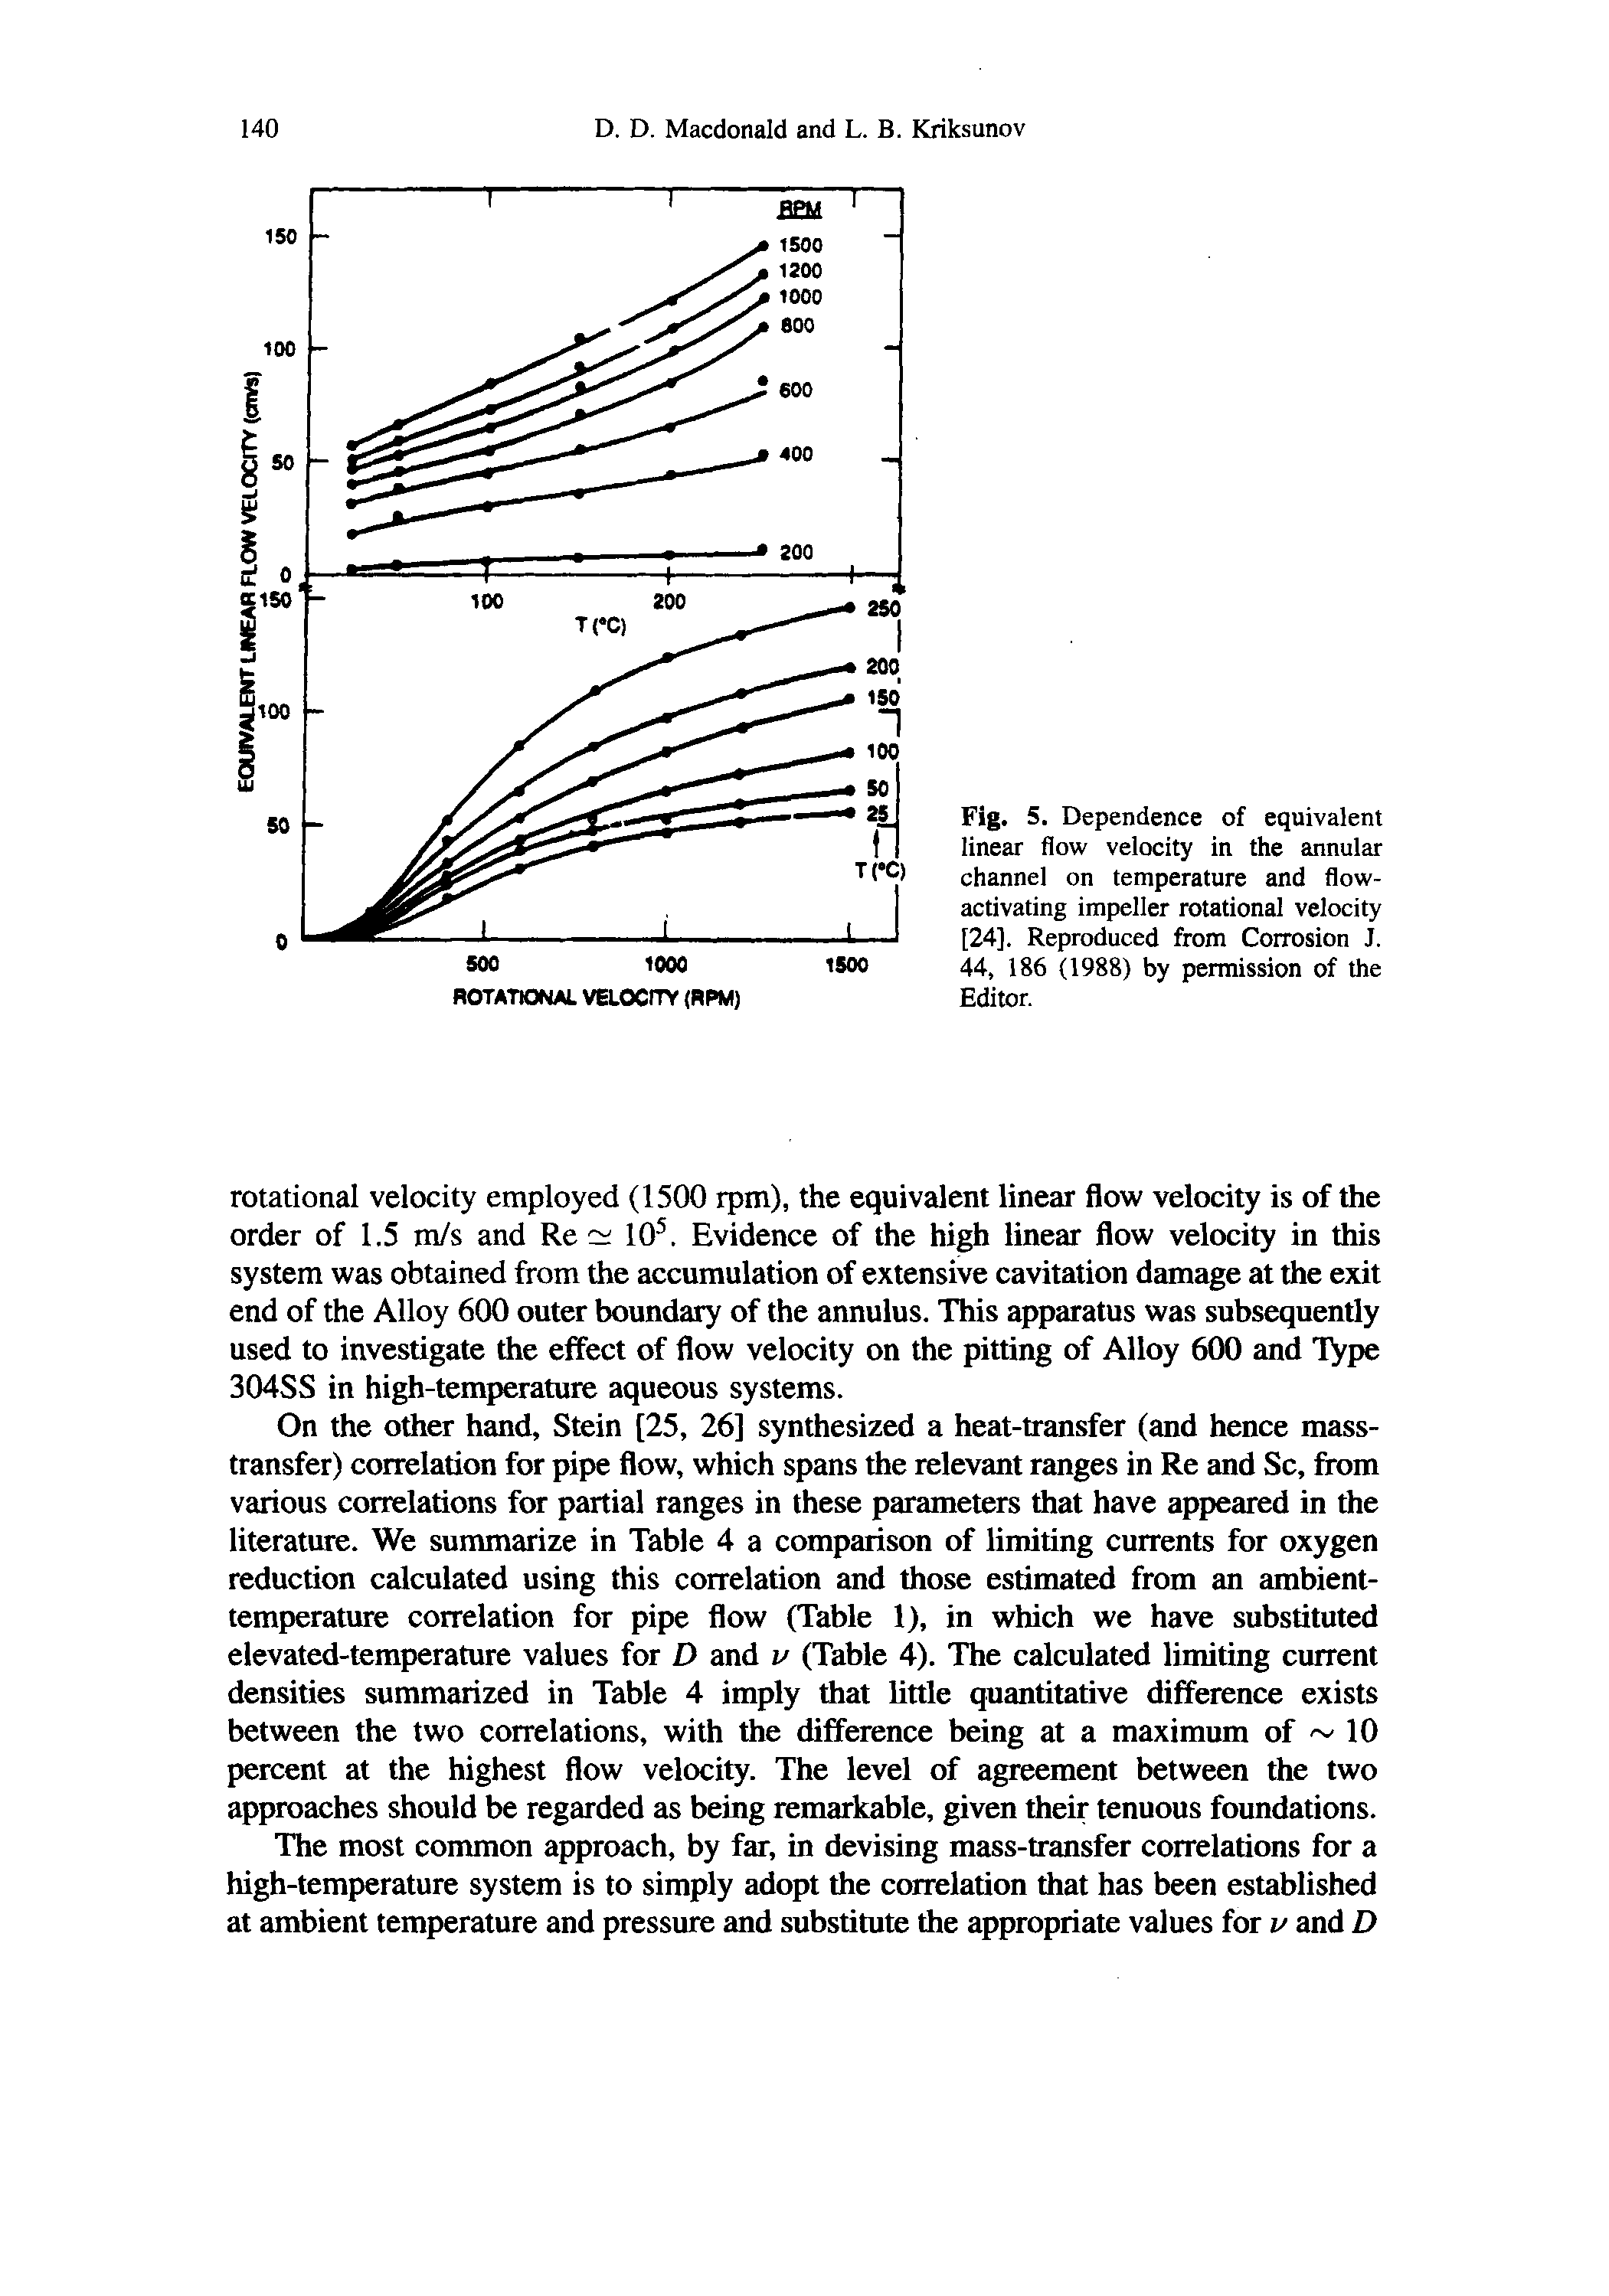 Fig. 5. Dependence of equivalent linear flow velocity in the annular channel on temperature and flowactivating impeller rotational velocity [24], Reproduced from Corrosion J. 44, 186 (1988) by permission of the Editor.